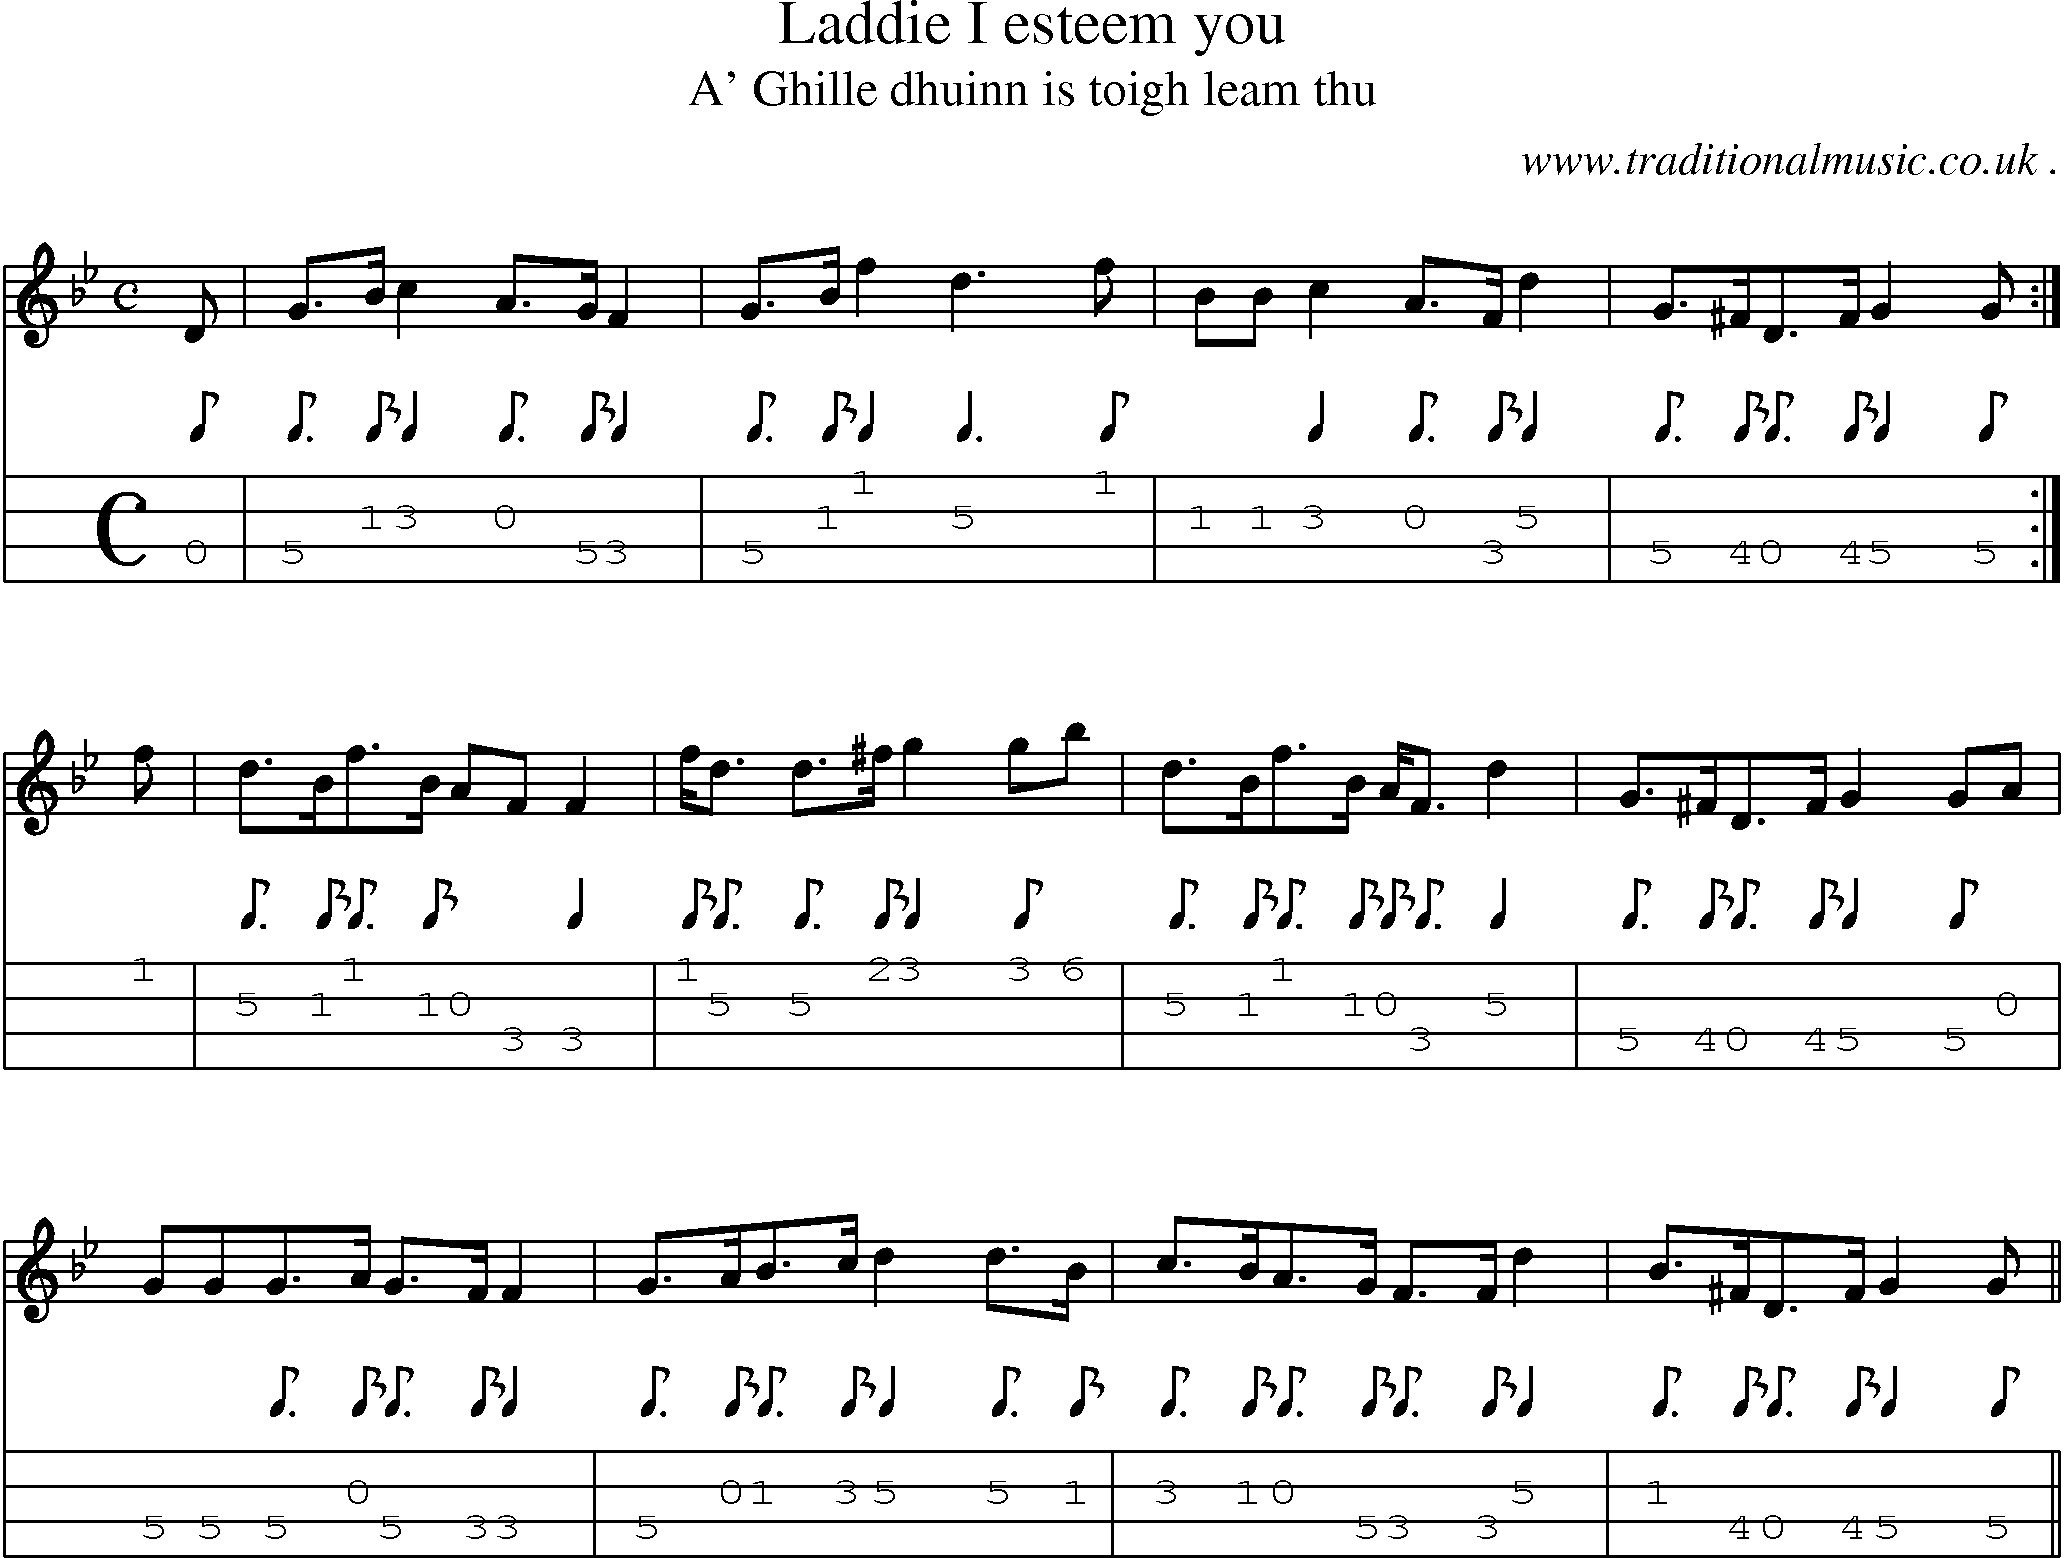 Sheet-music  score, Chords and Mandolin Tabs for Laddie I Esteem You